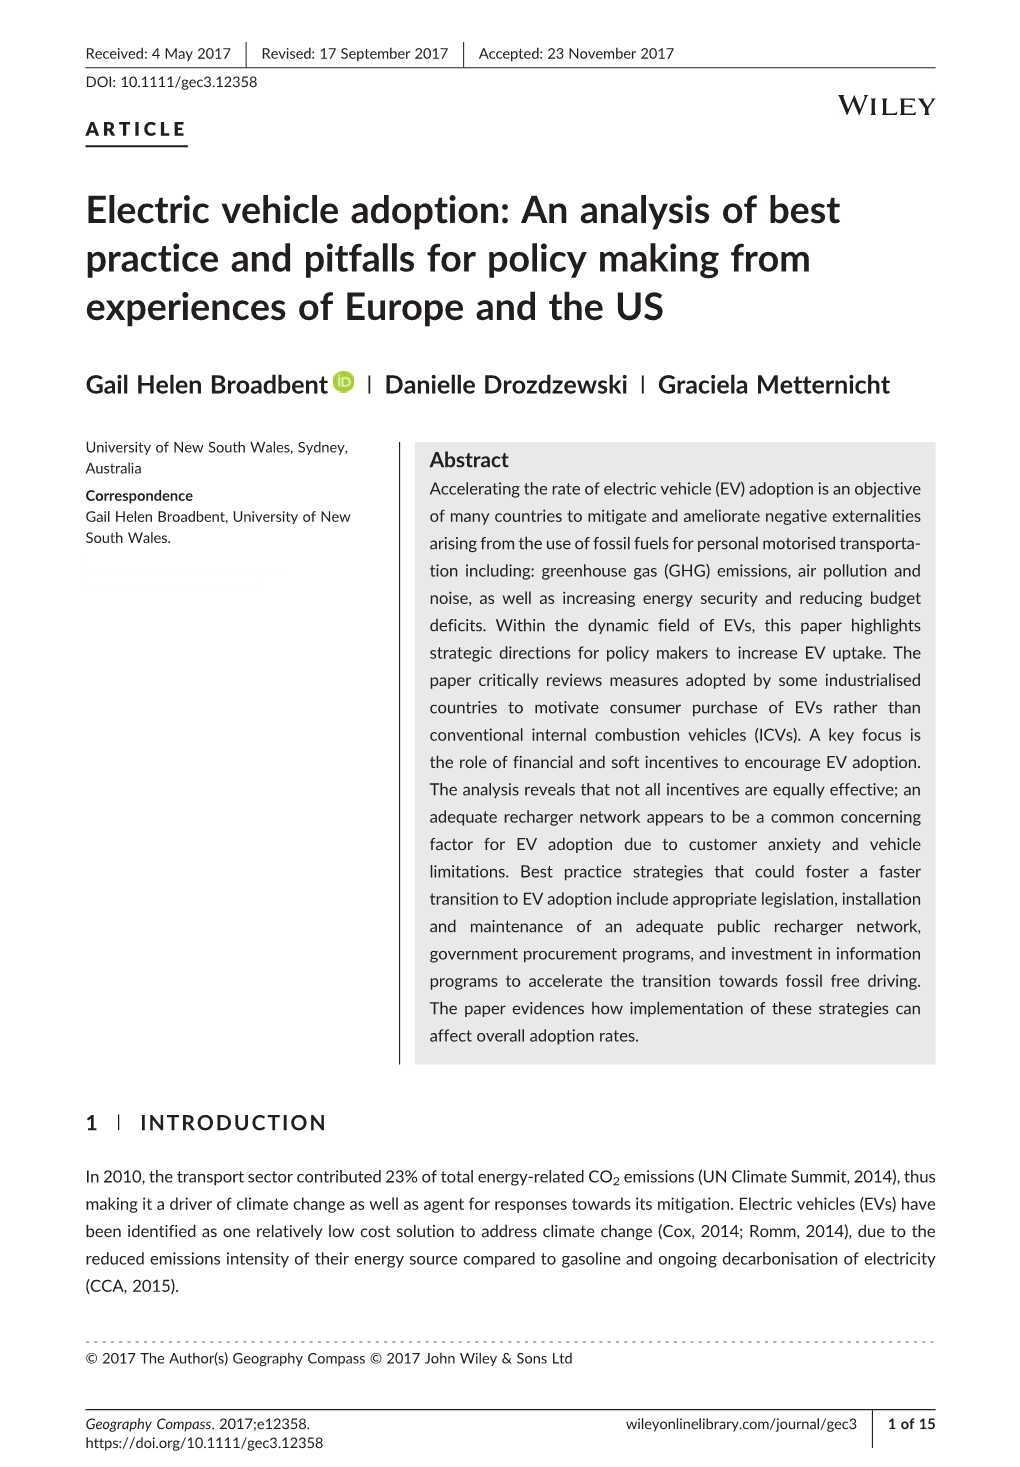 Electric Vehicle Adoption: an Analysis of Best Practice and Pitfalls for Policy Making from Experiences of Europe and the US